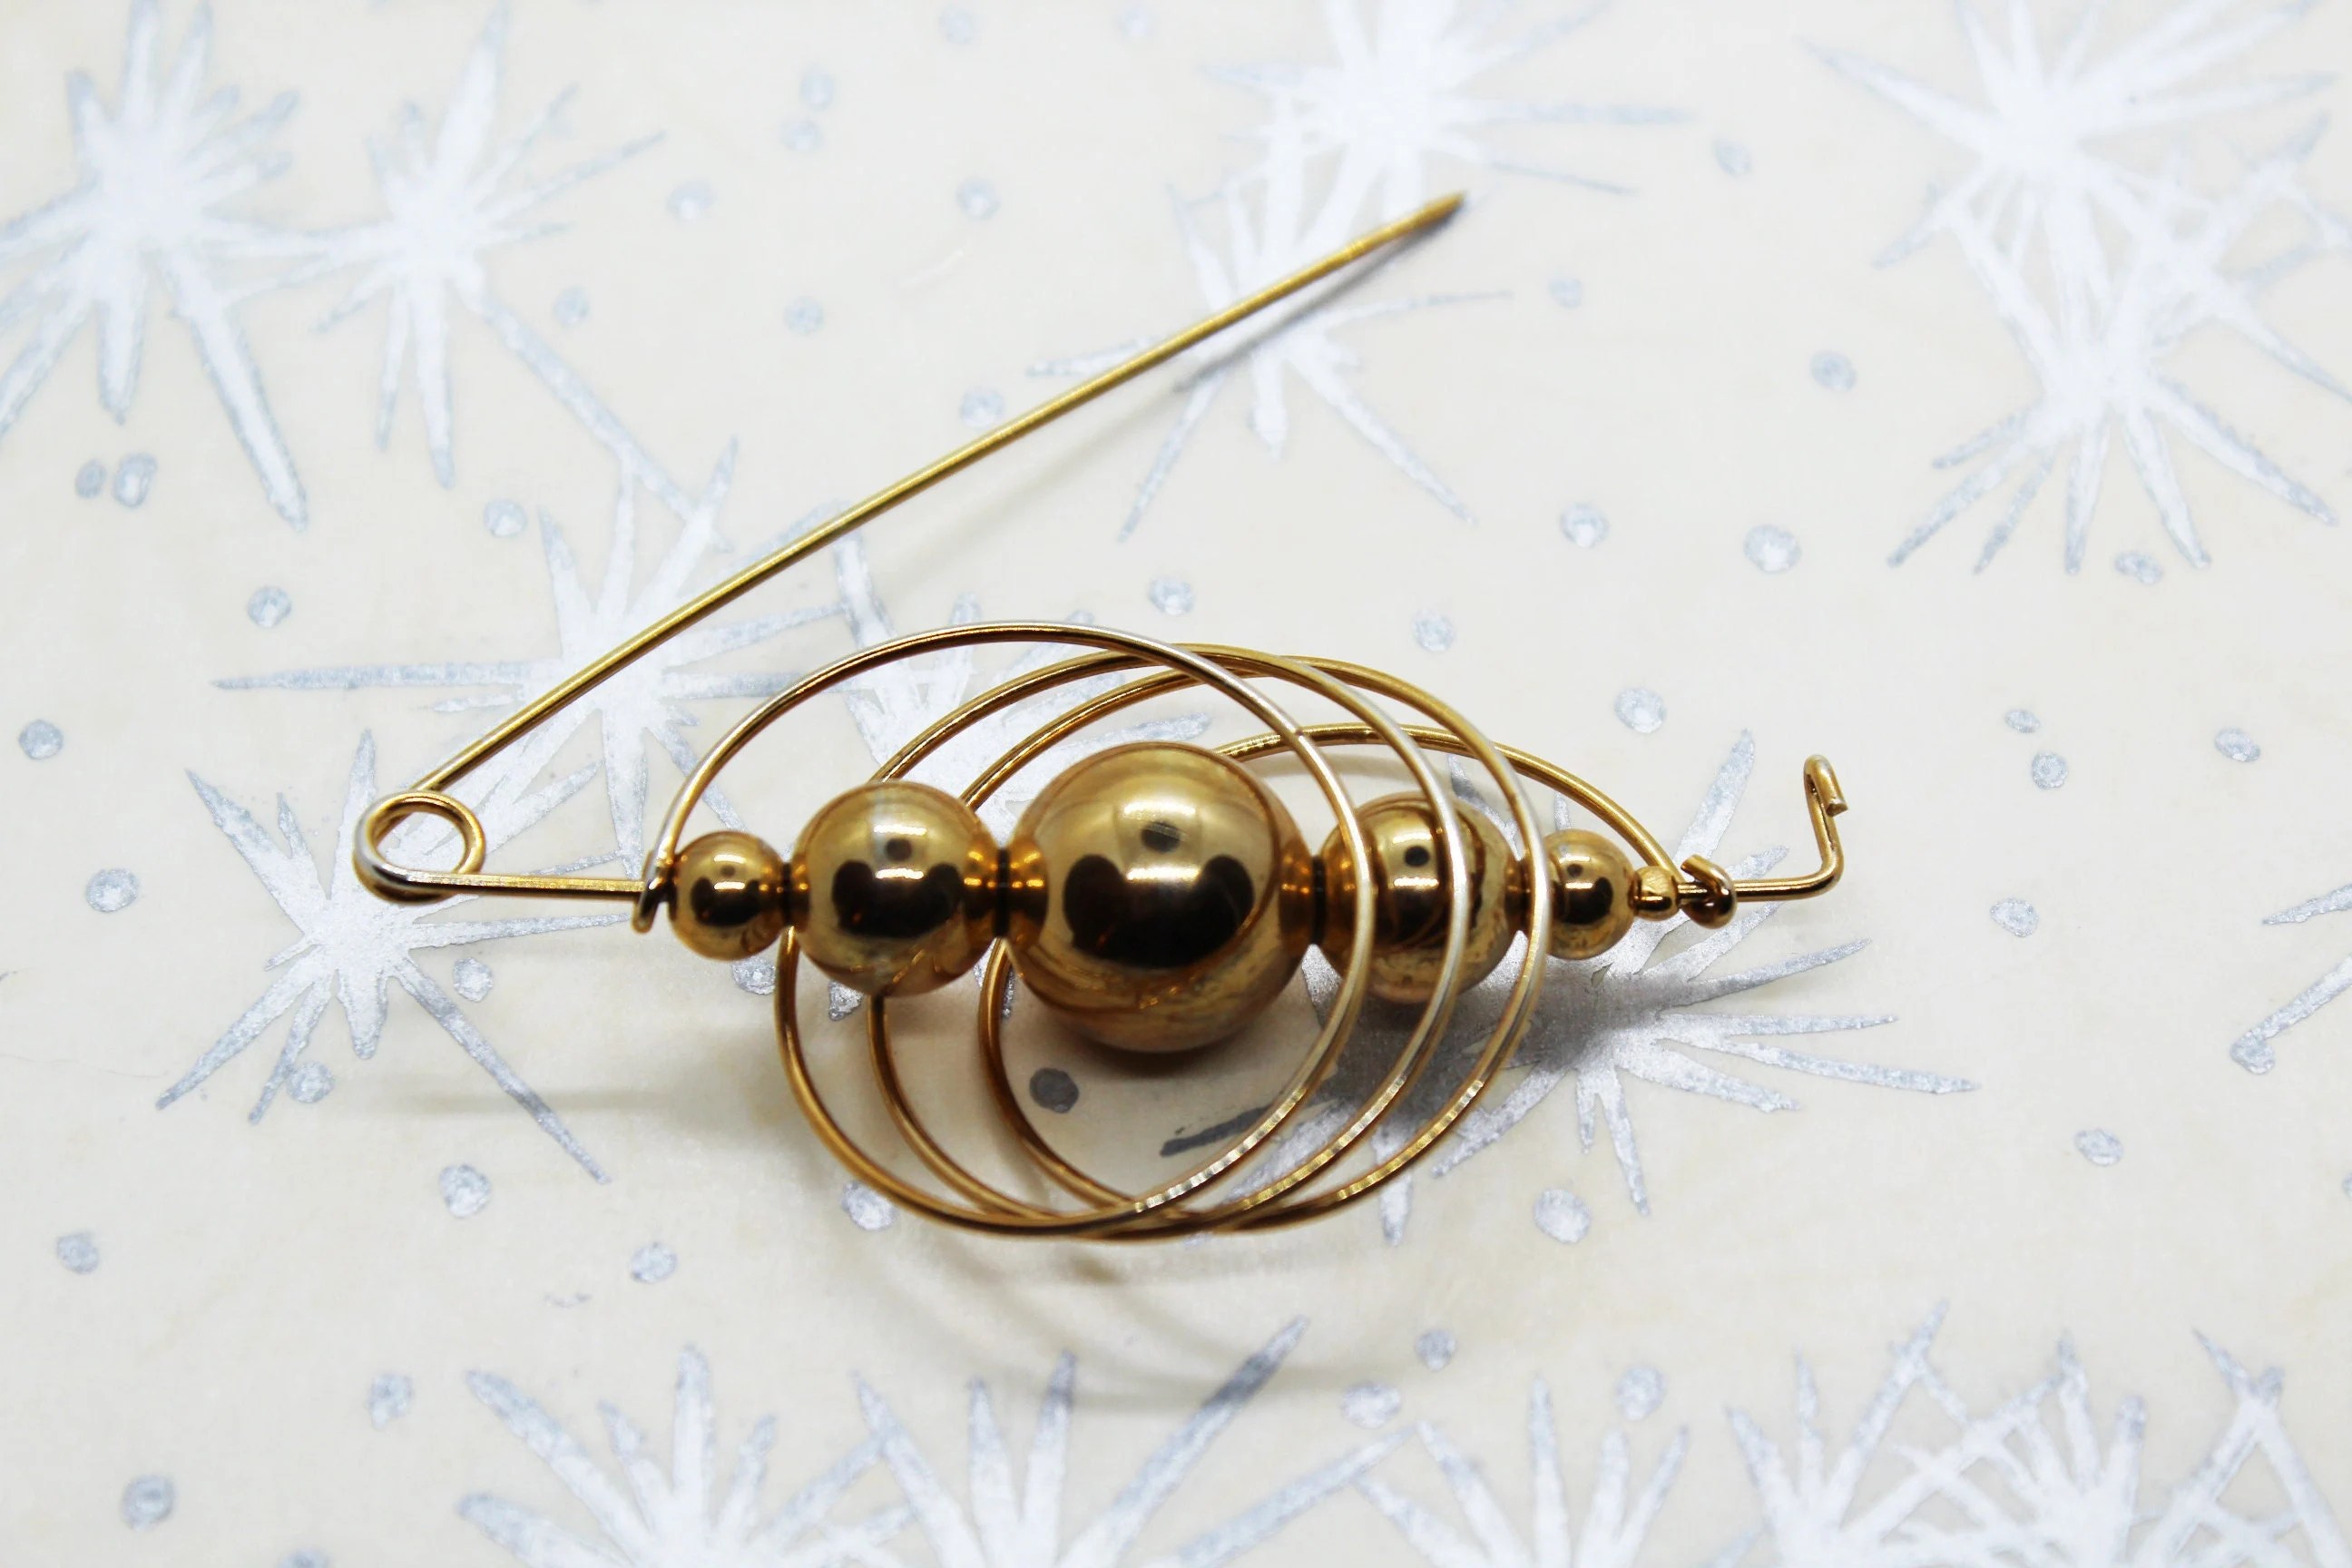 Vintage Geometric Ball & Hoop Accent Pin - Retro Costume Jewelry at Whispering City RVA